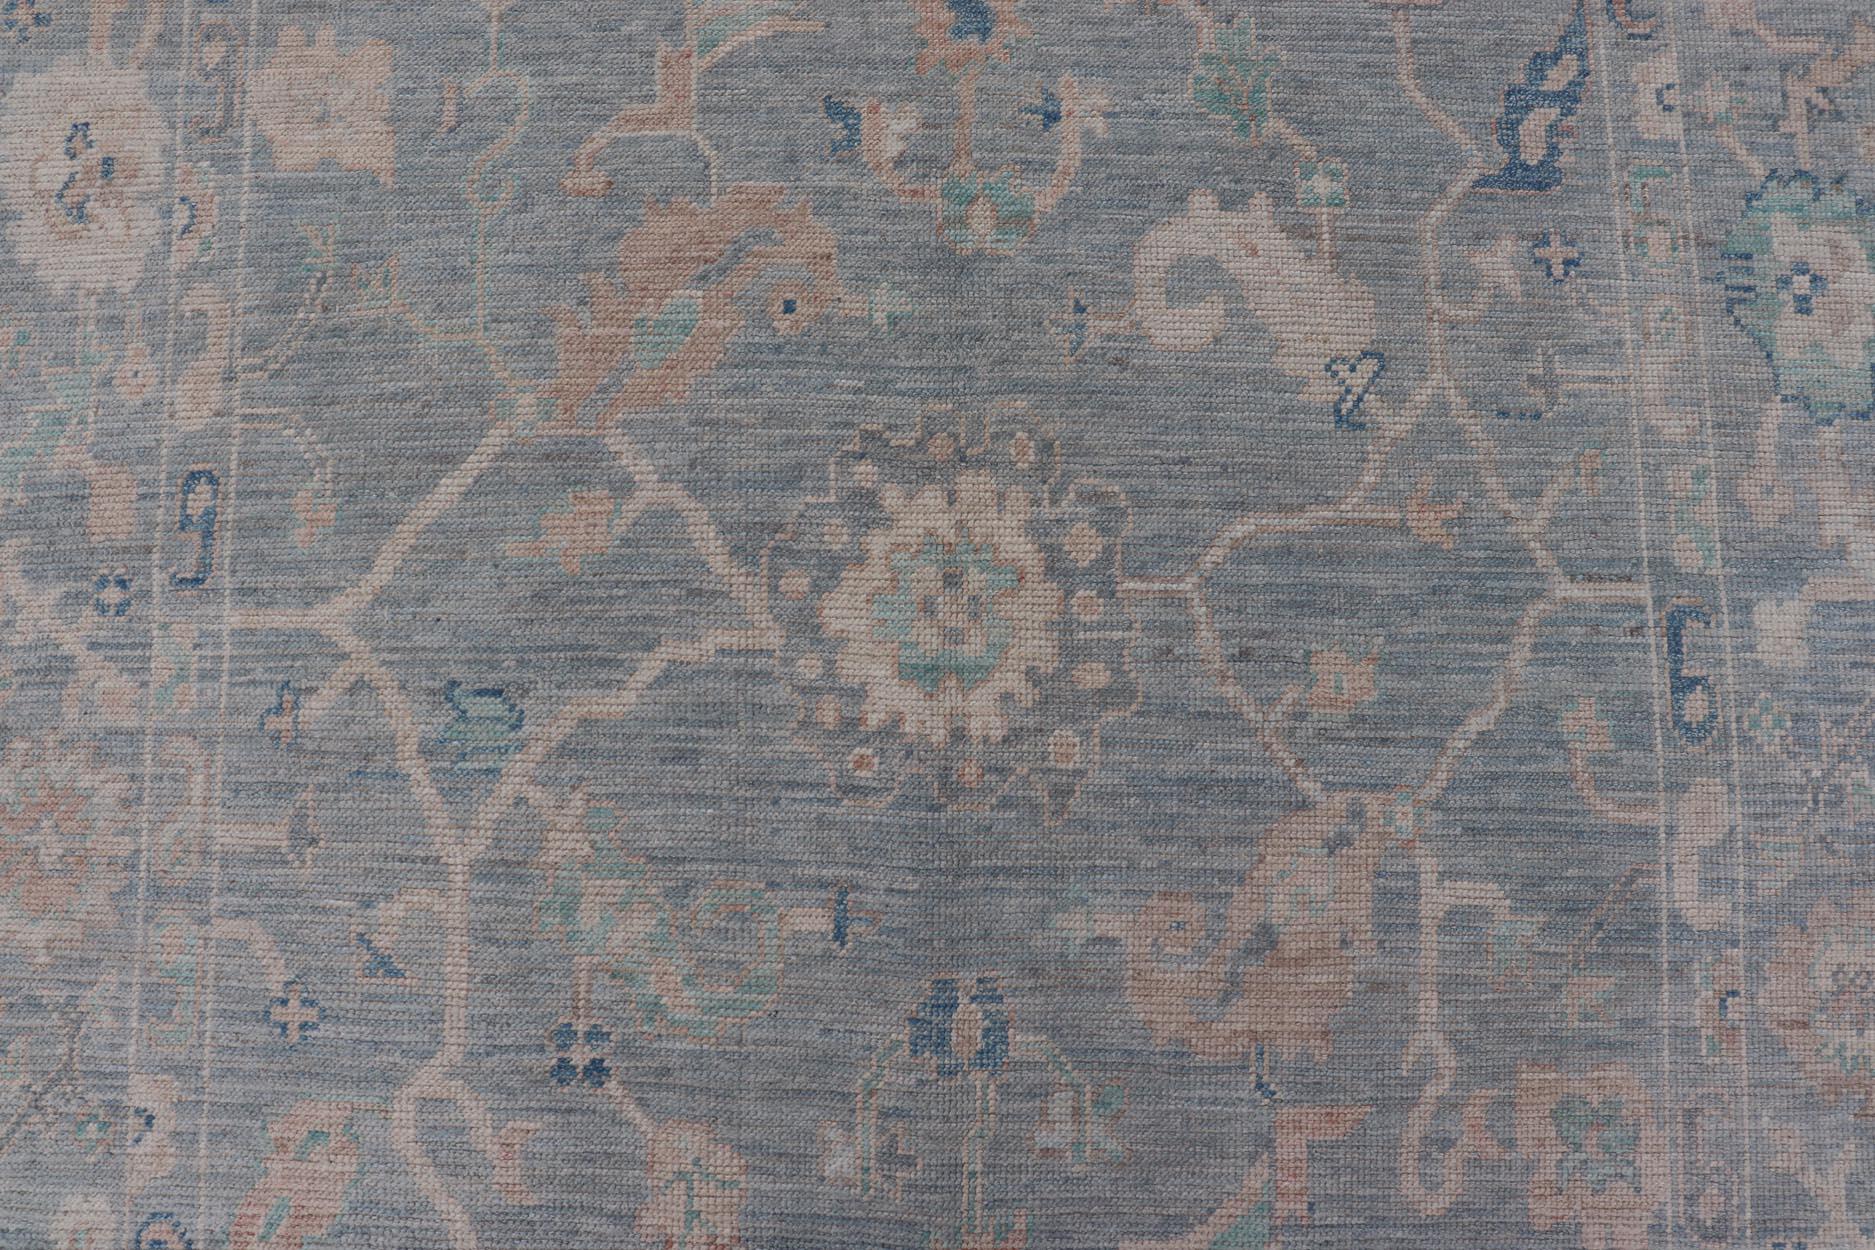 Contemporary Modern Oushak Rug With in Light Gray Blue Background and All-Over Floral Motifs For Sale